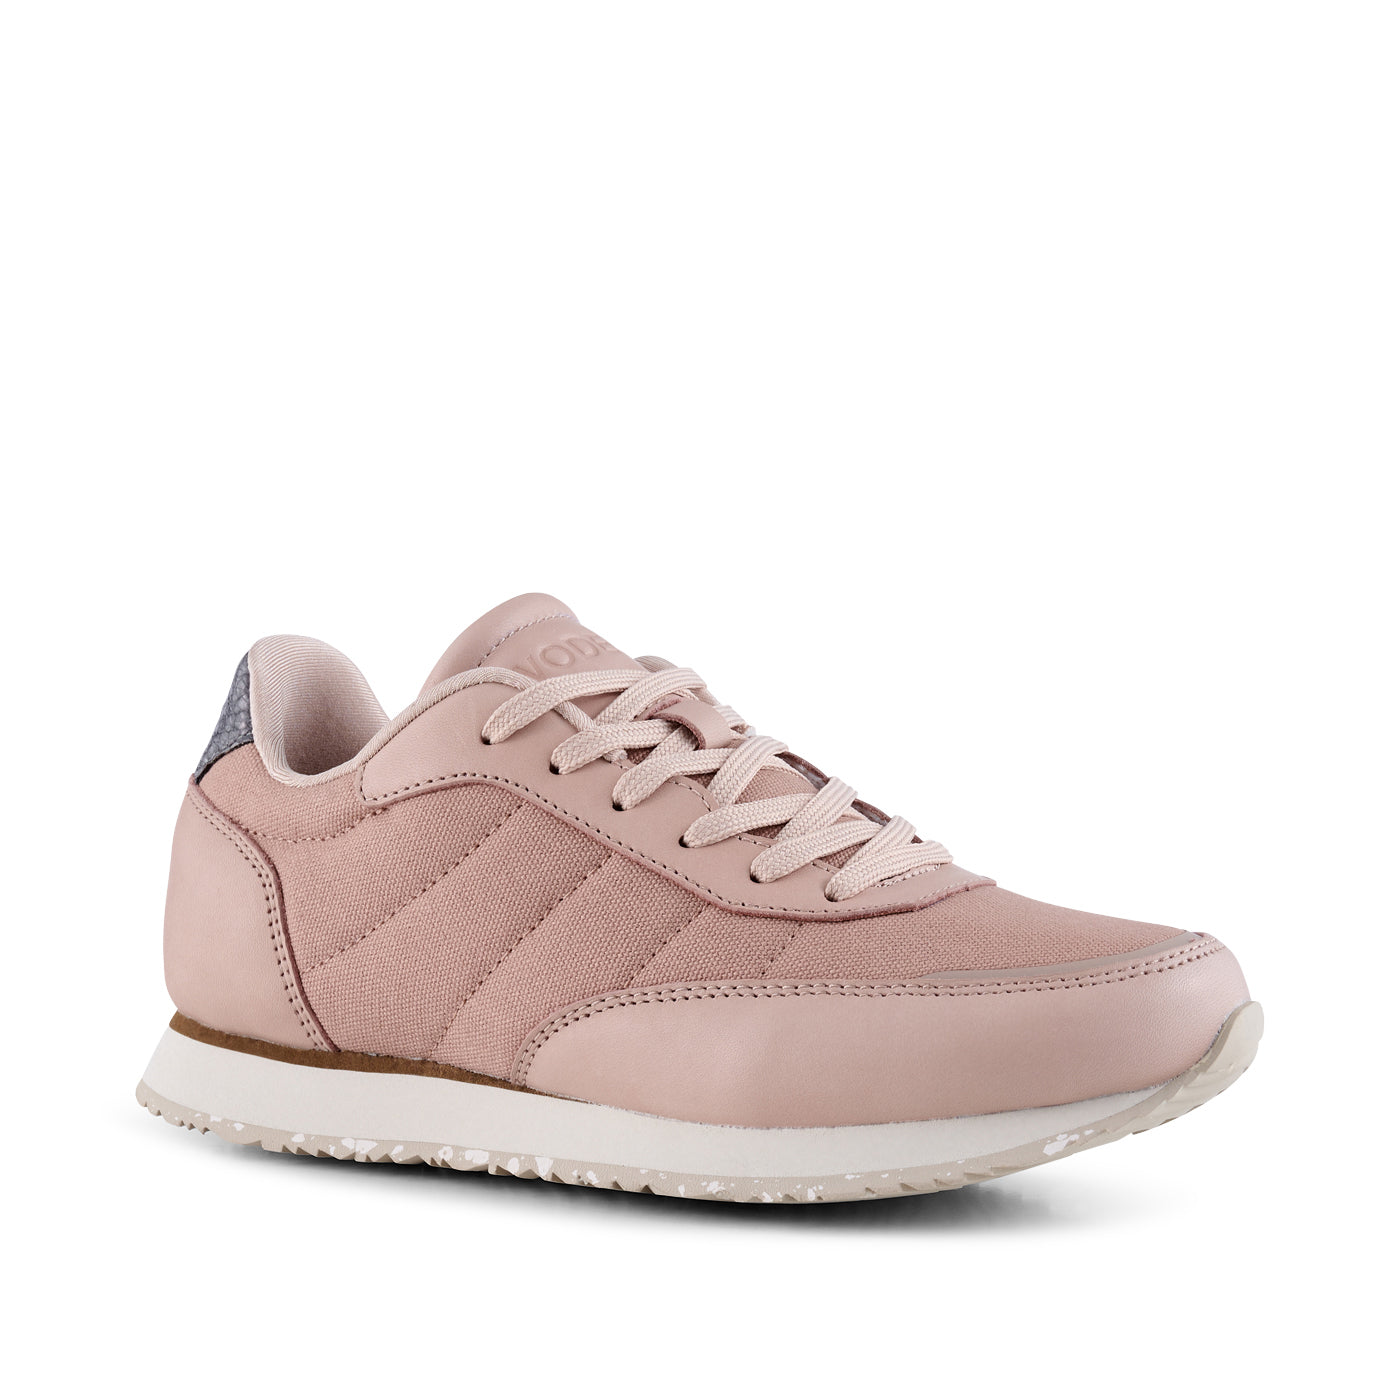 WODEN Nellie Organic Sneakers 800 Dry Rose